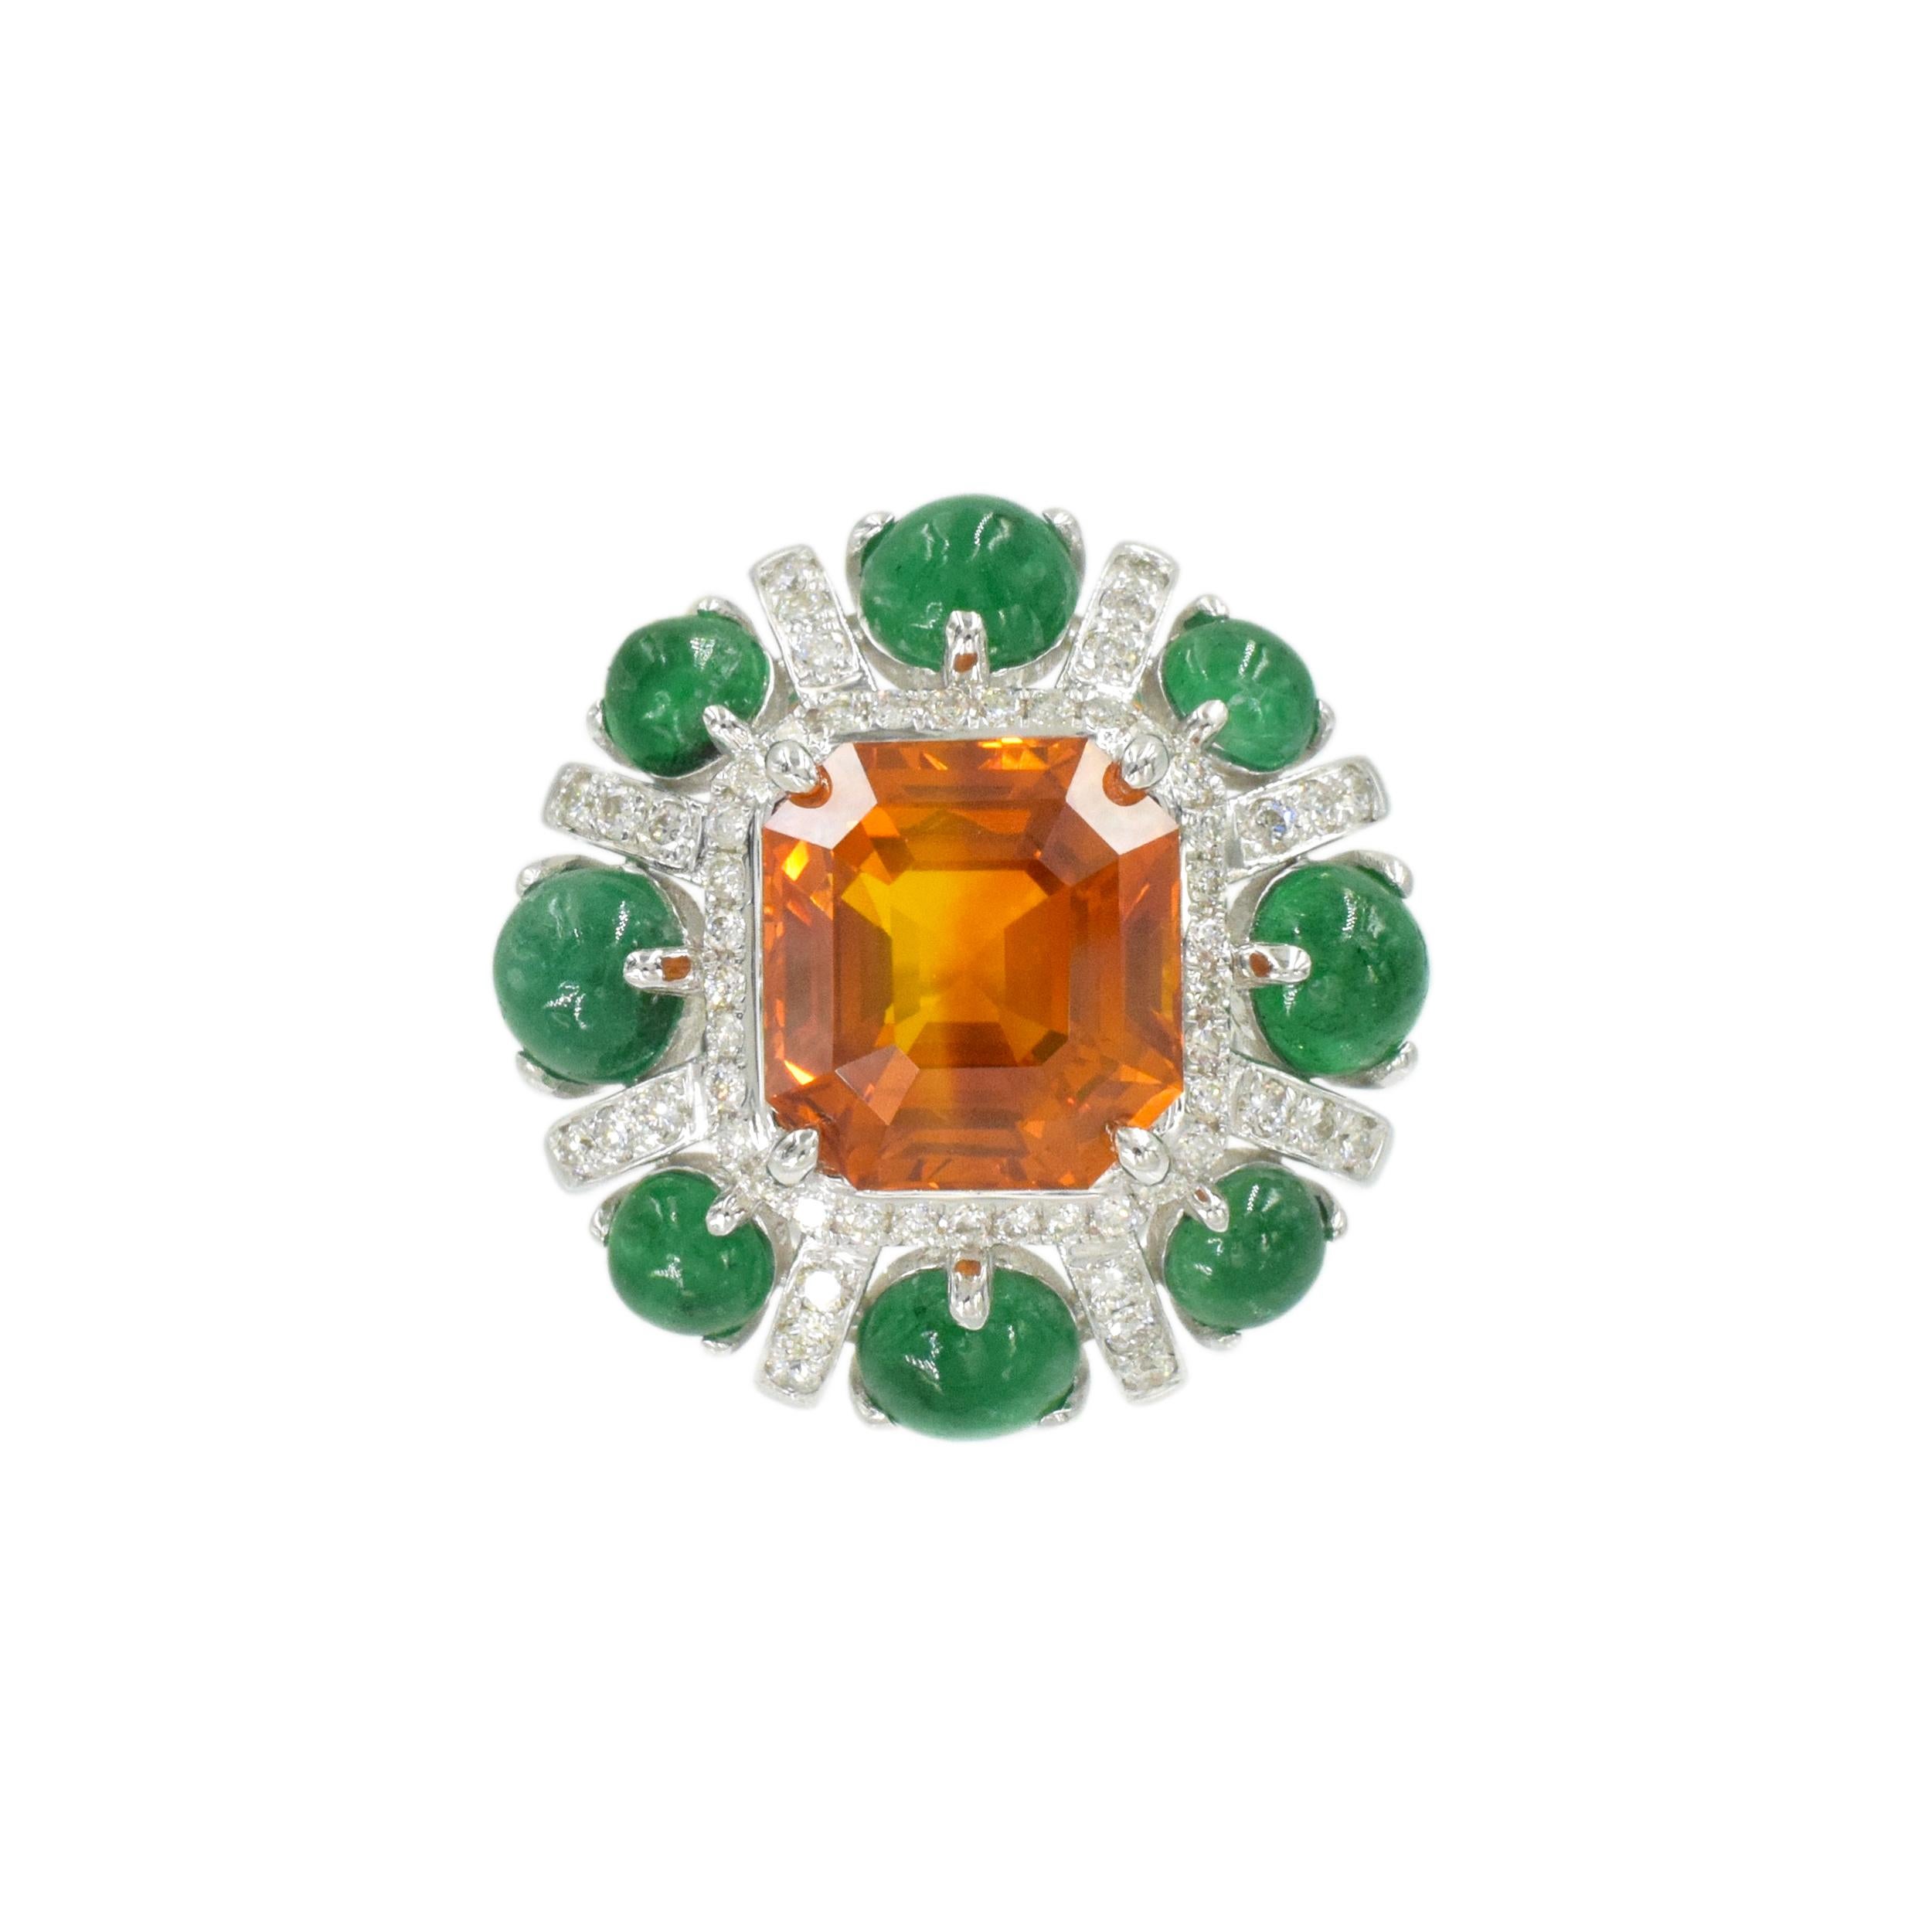 Orange Sapphire, Emerald, and Diamond Ring. This ring has a rectangular cut orange sapphire of 6.56 carats (Heat Treated, AGL# 1112782), round cabochon emerald   and diamonds of 0.40 total weight . all set in 18k white gold. Au750,  Ring size: 6.25;
